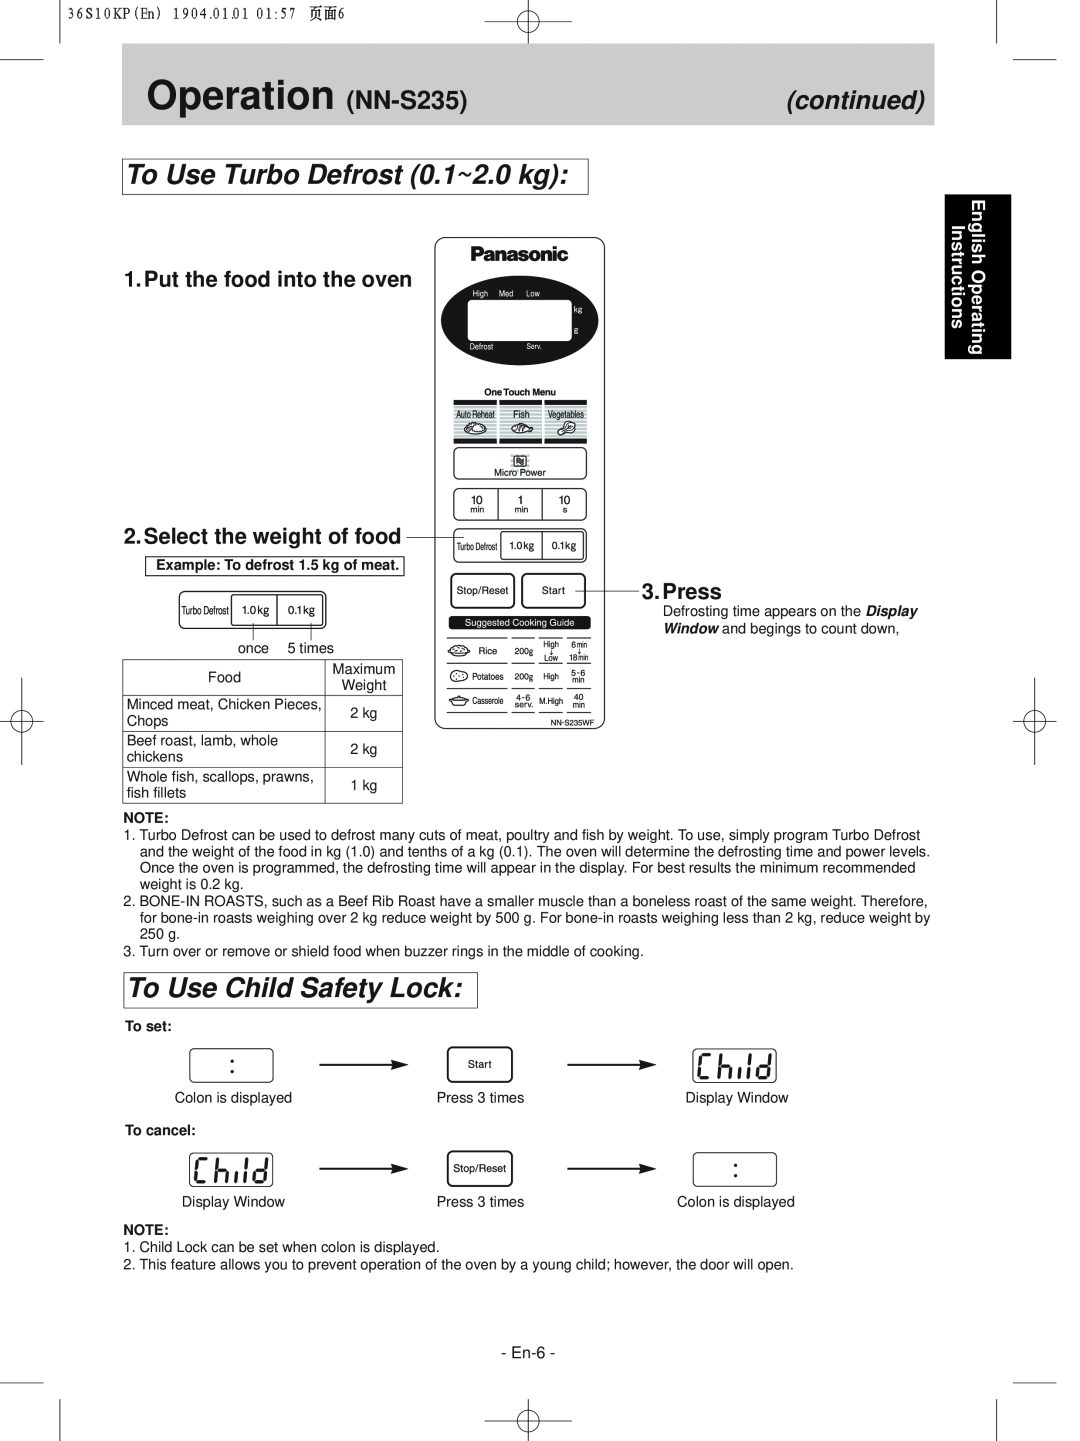 Panasonic NN-S215WF manual Operation NN-S235, To Use Turbo Defrost 0.1~2.0 kg, To Use Child Safety Lock, continued, Press 